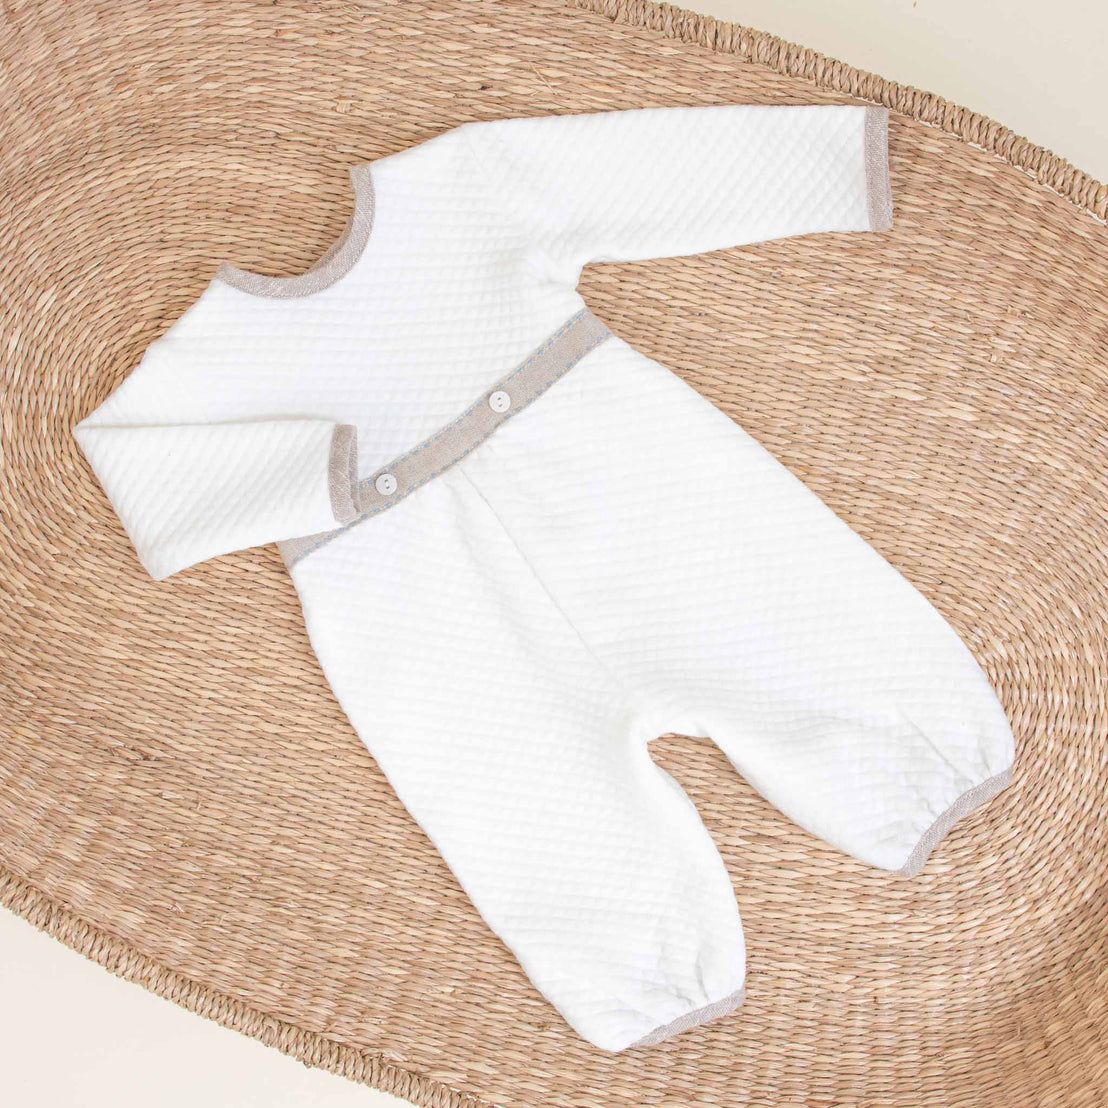 An upscale Austin Newborn Romper with long sleeves and a gray trim, displayed flat on a round woven wicker mat against a beige background.